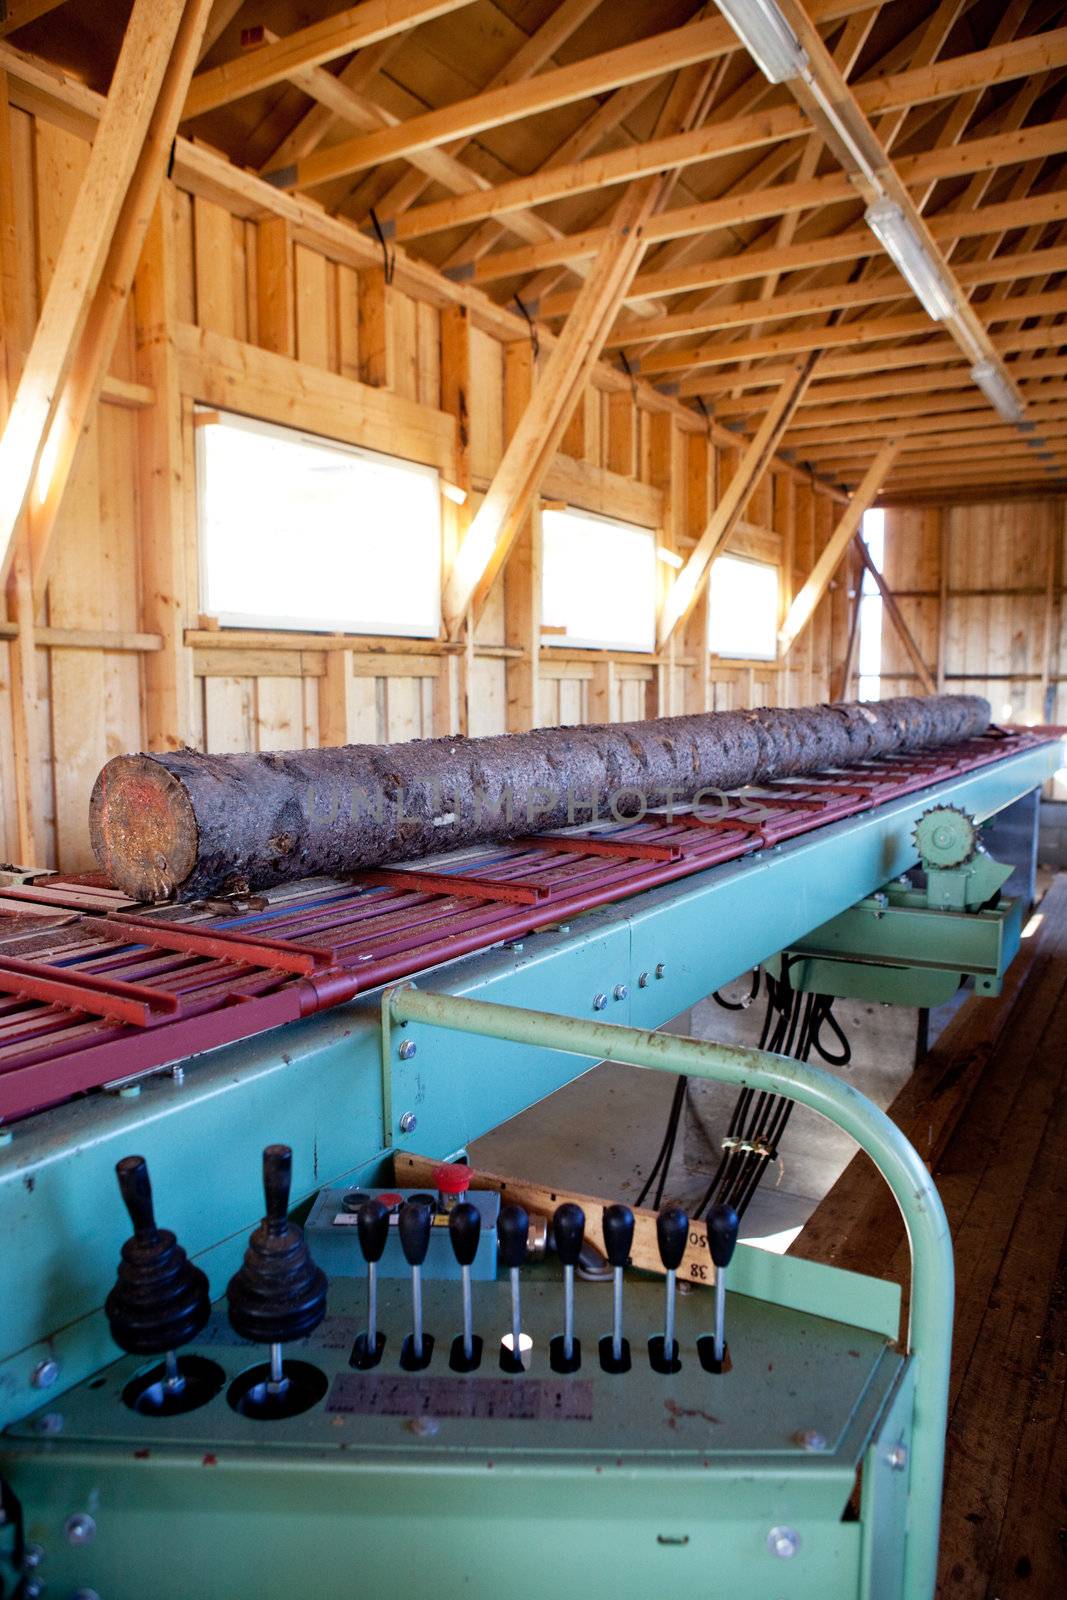 A lumber mill detail showing a log ready to be cut